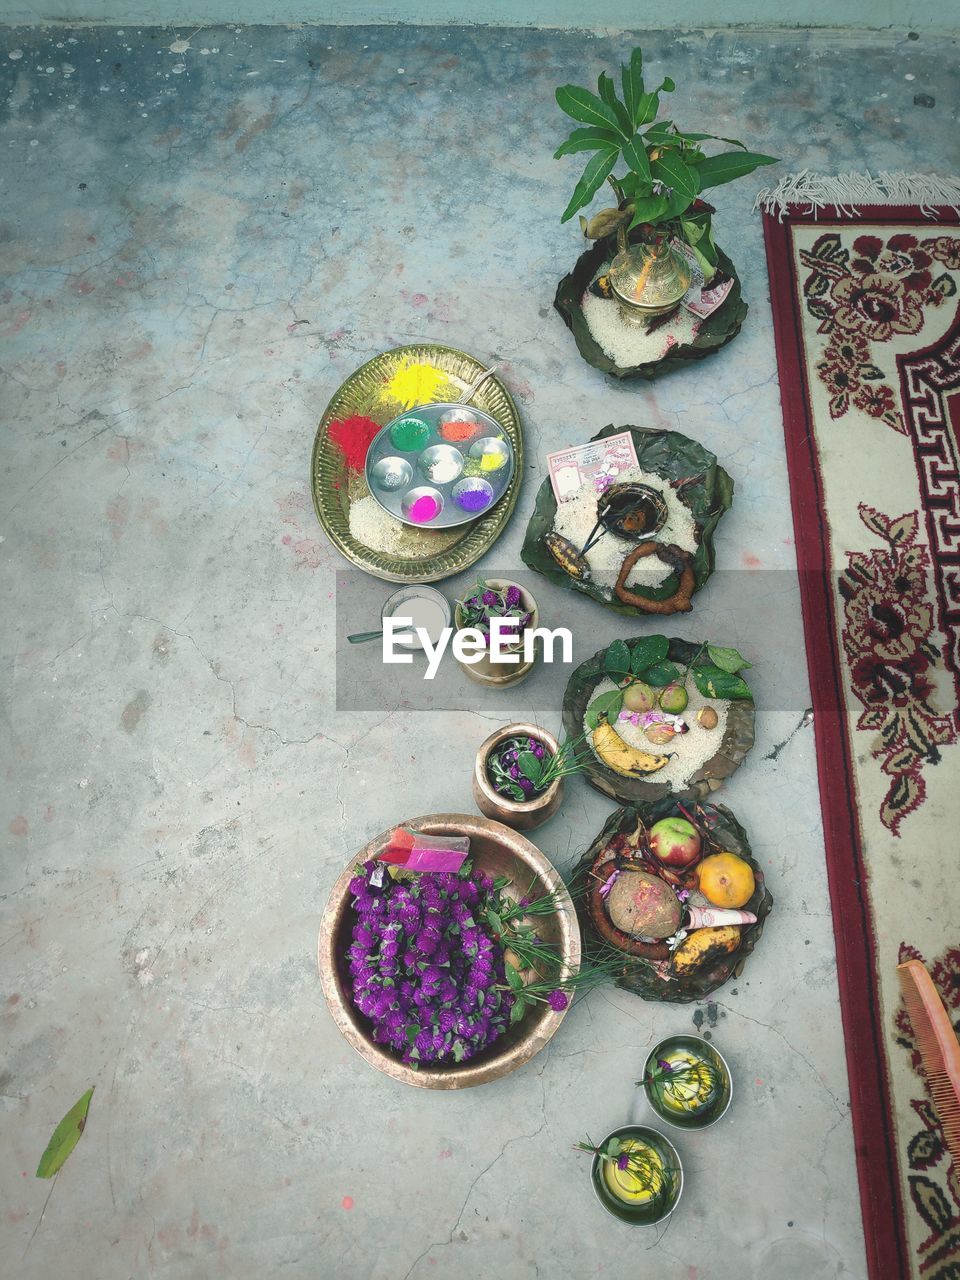 HIGH ANGLE VIEW OF MULTI COLORED ART ON FLOOR